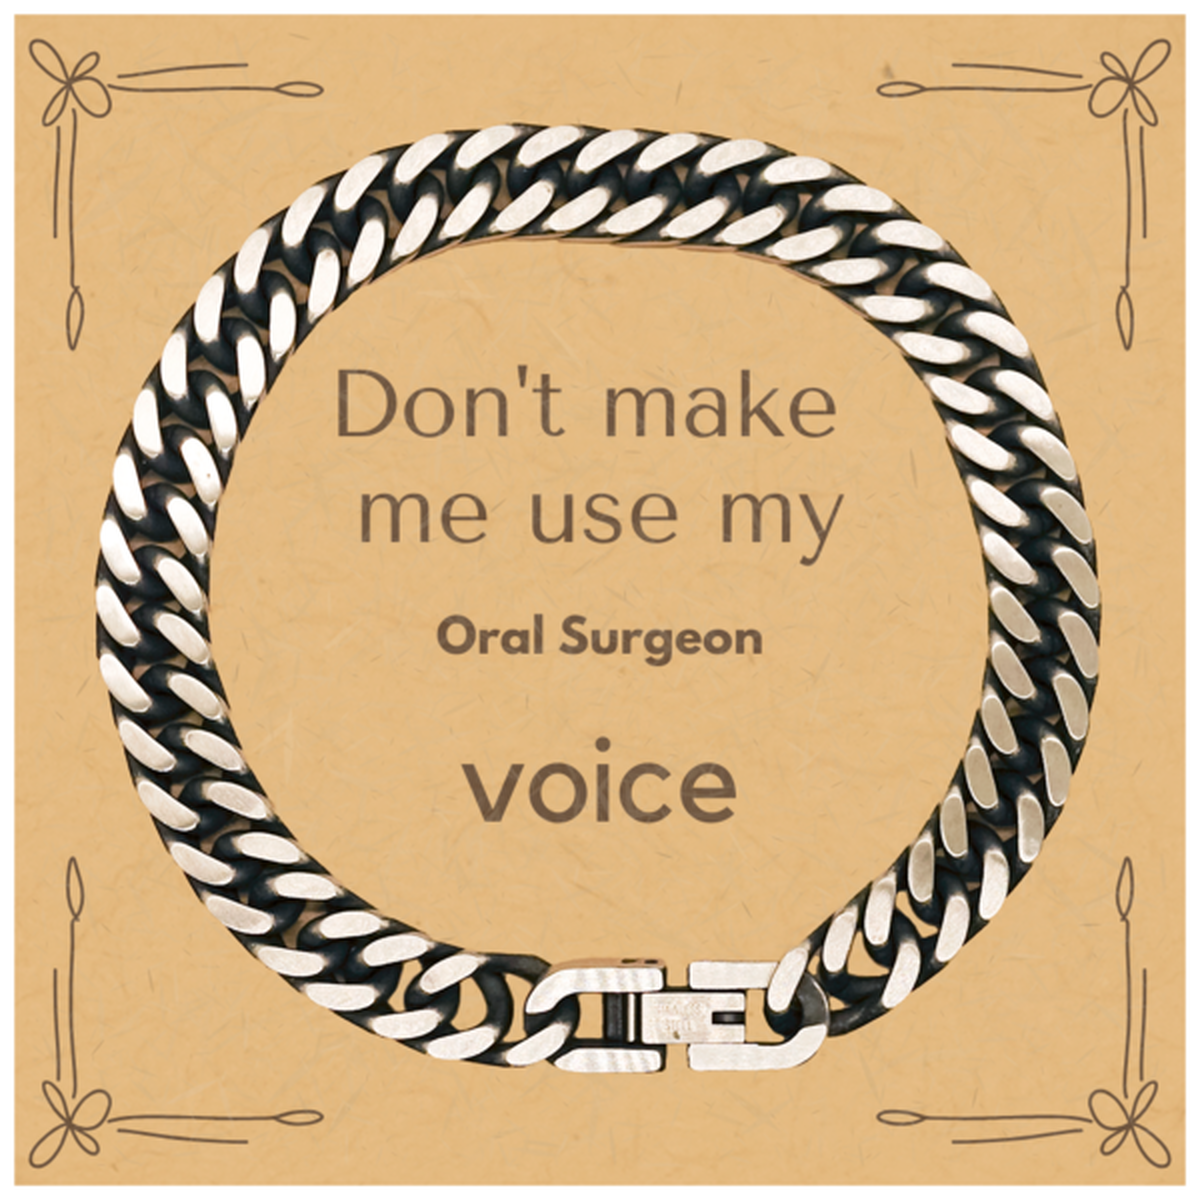 Don't make me use my Oral Surgeon voice, Sarcasm Oral Surgeon Card Gifts, Christmas Oral Surgeon Cuban Link Chain Bracelet Birthday Unique Gifts For Oral Surgeon Coworkers, Men, Women, Colleague, Friends